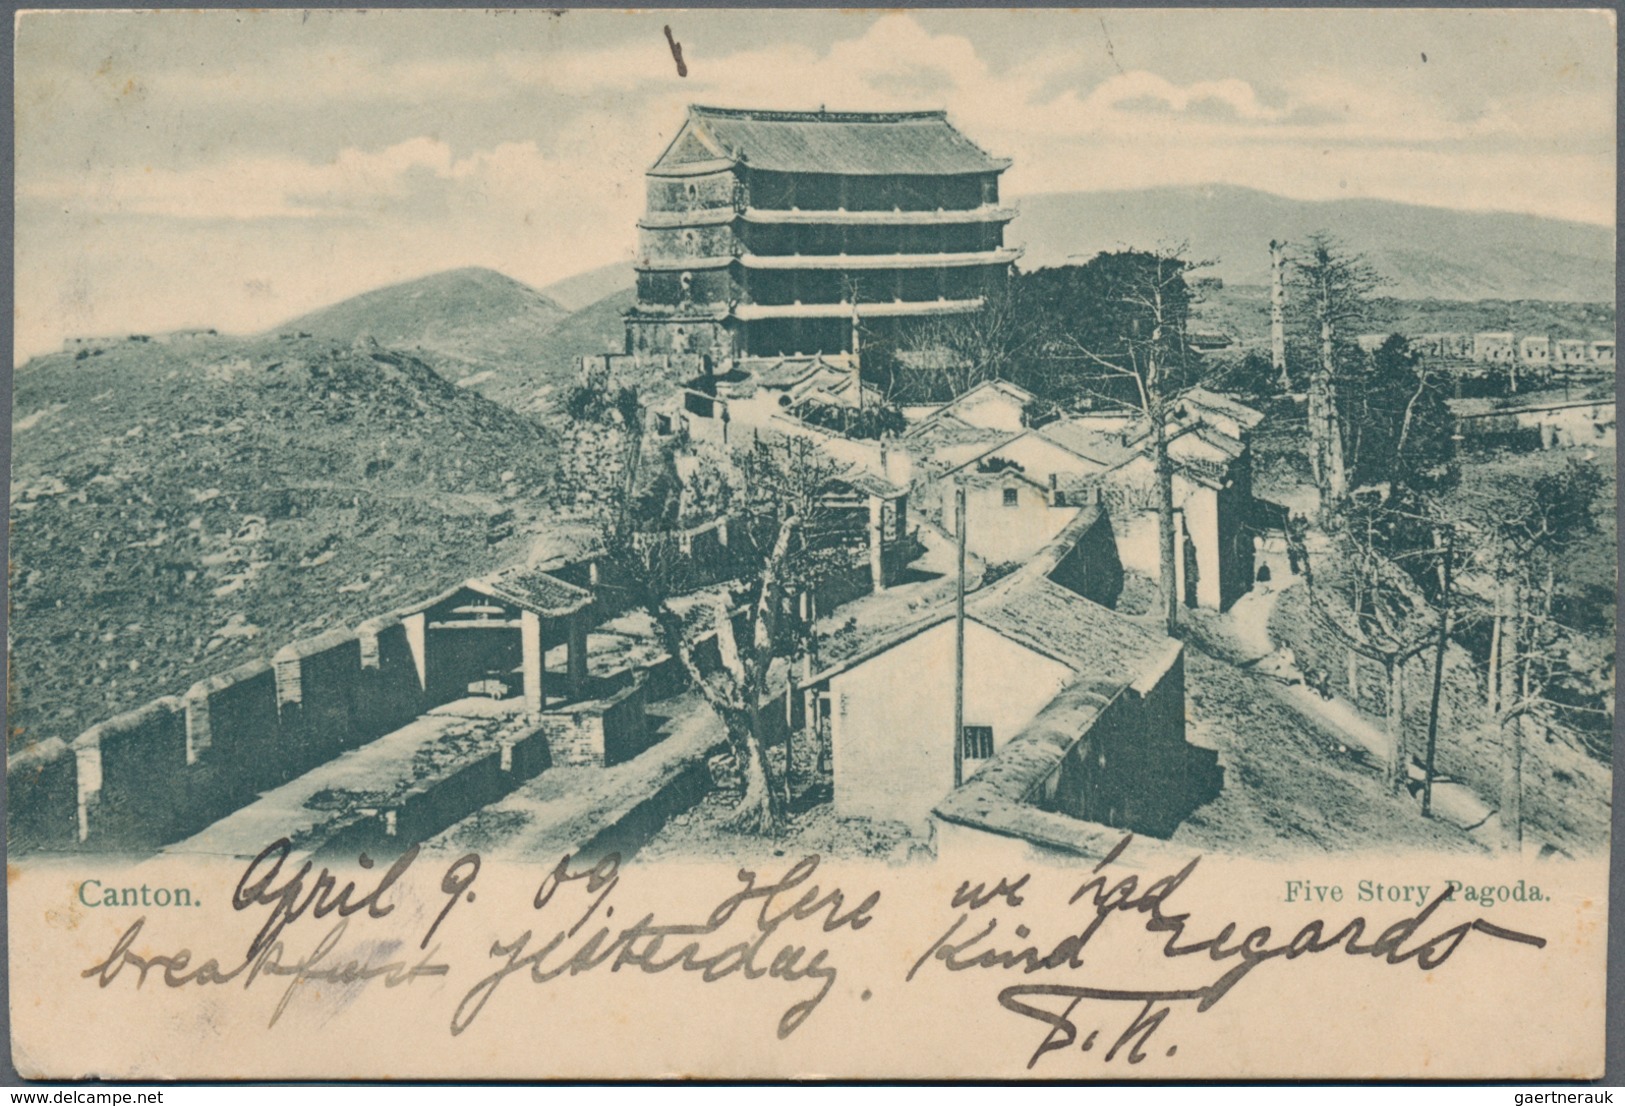 China: 1900/11, picture post cards w. lithos (12) with views mainly of Peking inc. Hotel Tallieu, Rw